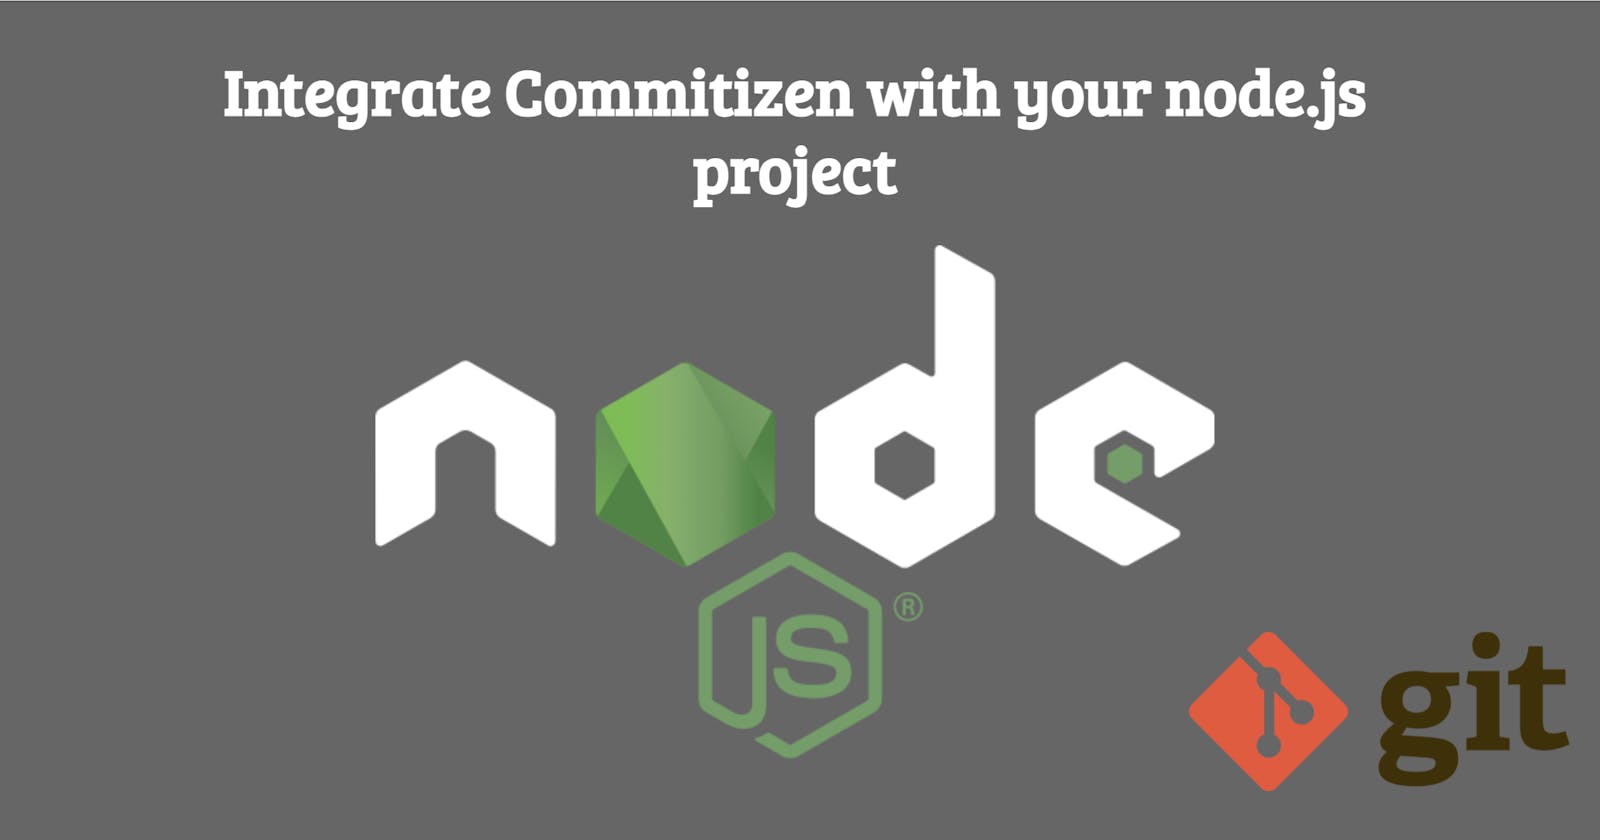 Integrate Commitizen with your node.js project